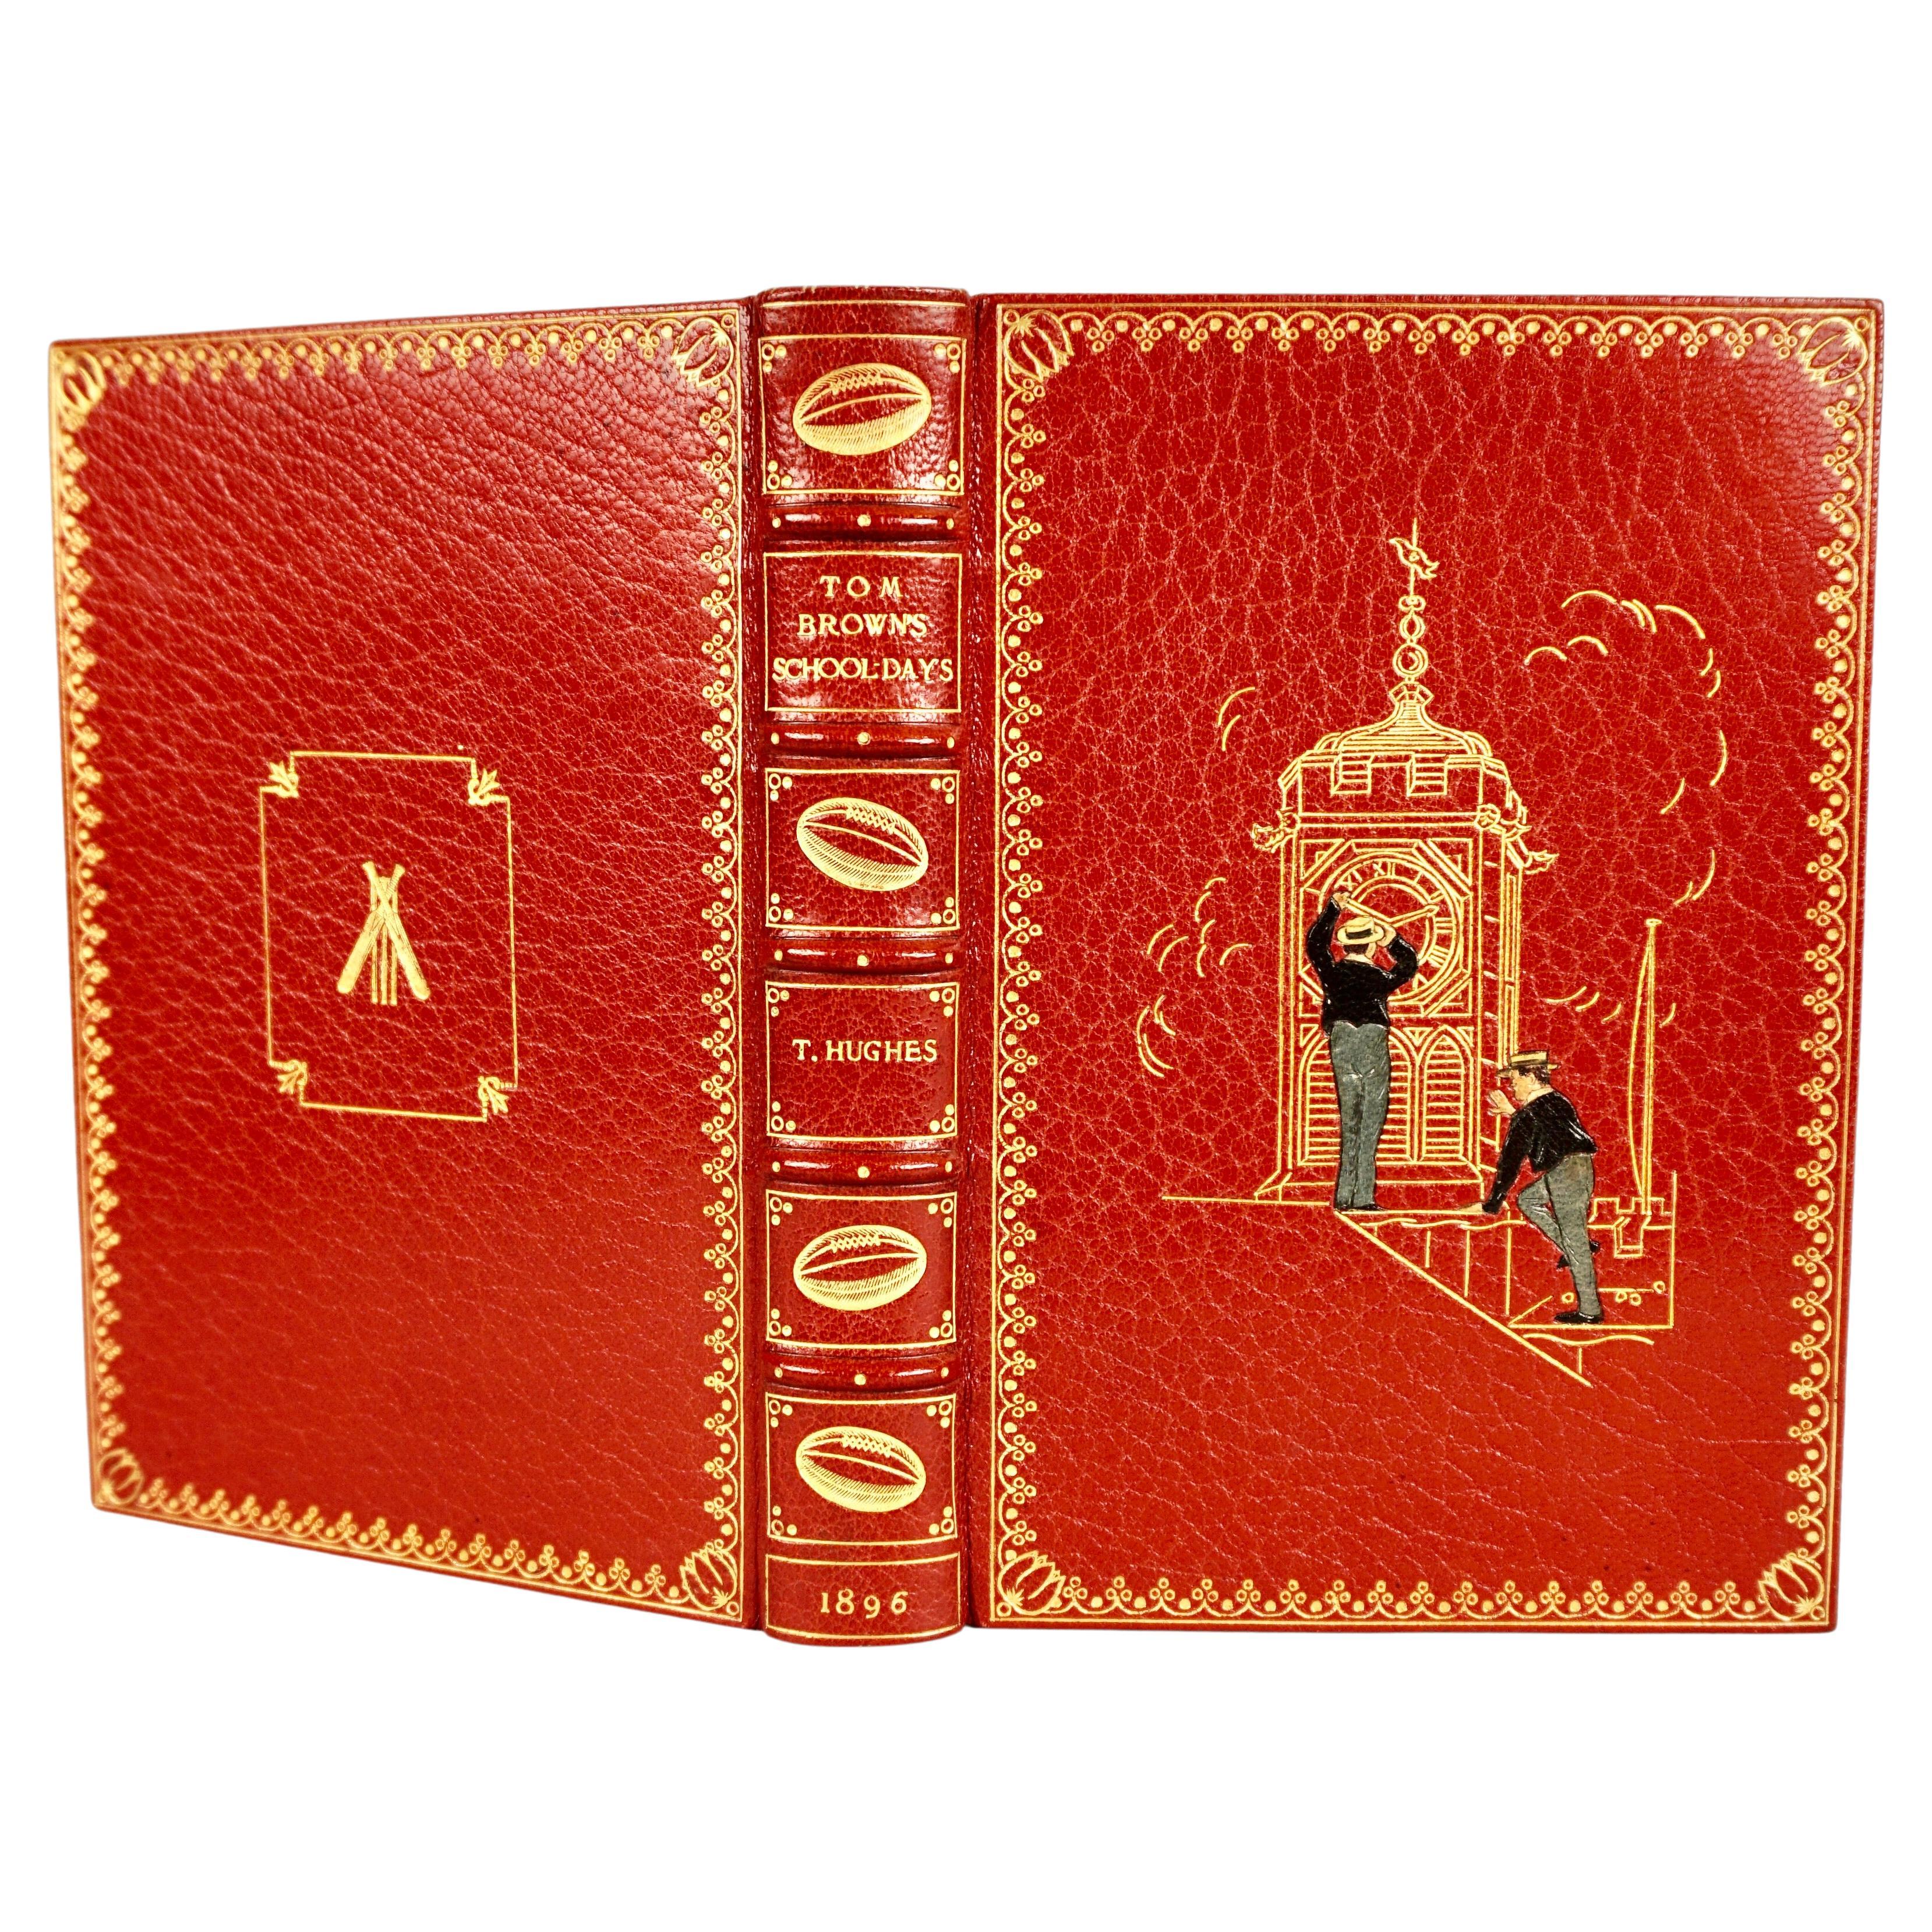 Magnificent Tooled Red Leather Binding by Kelliegram of Tom Brown's School Days